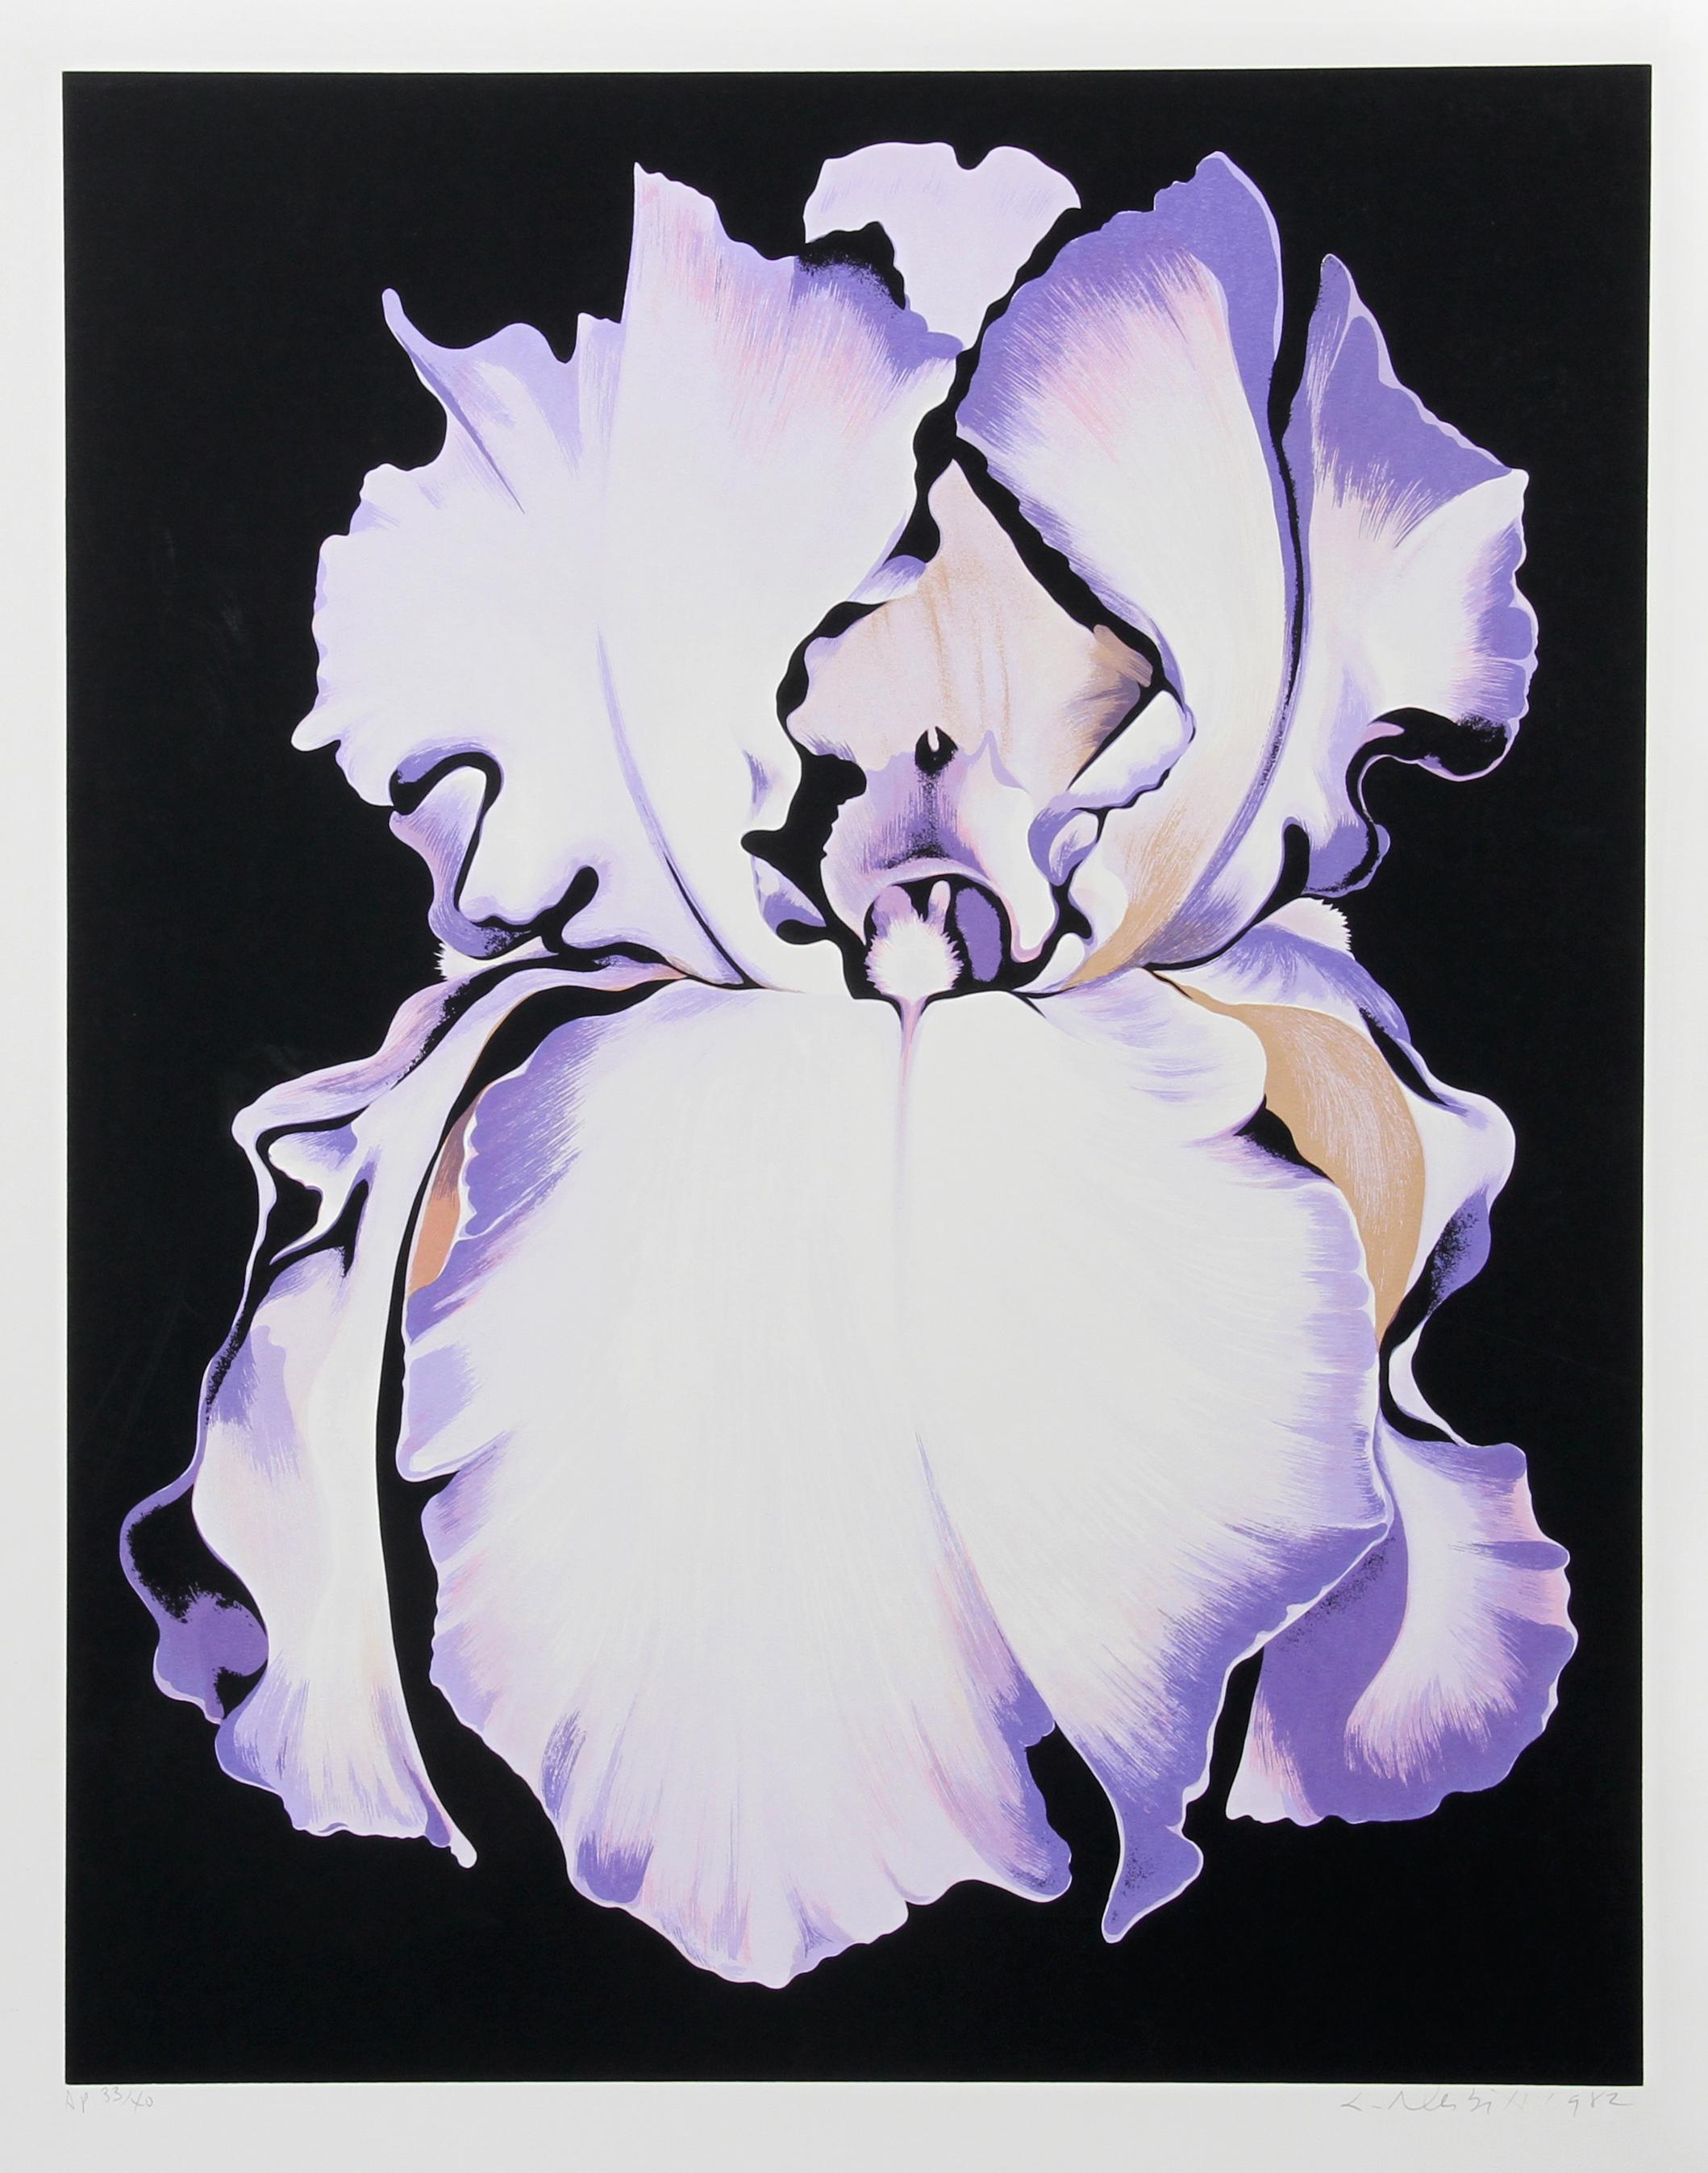 Artist: Lowell Blair Nesbitt, American (1933 - 1993)
Title: White Iris on Black
Year: 1982
Medium: Silkscreen, signed and numbered in pencil
Edition: AP 40
Image Size: 31.5 x 25 inches
Size: 38 x 29 in. (96.52 x 73.66 cm)